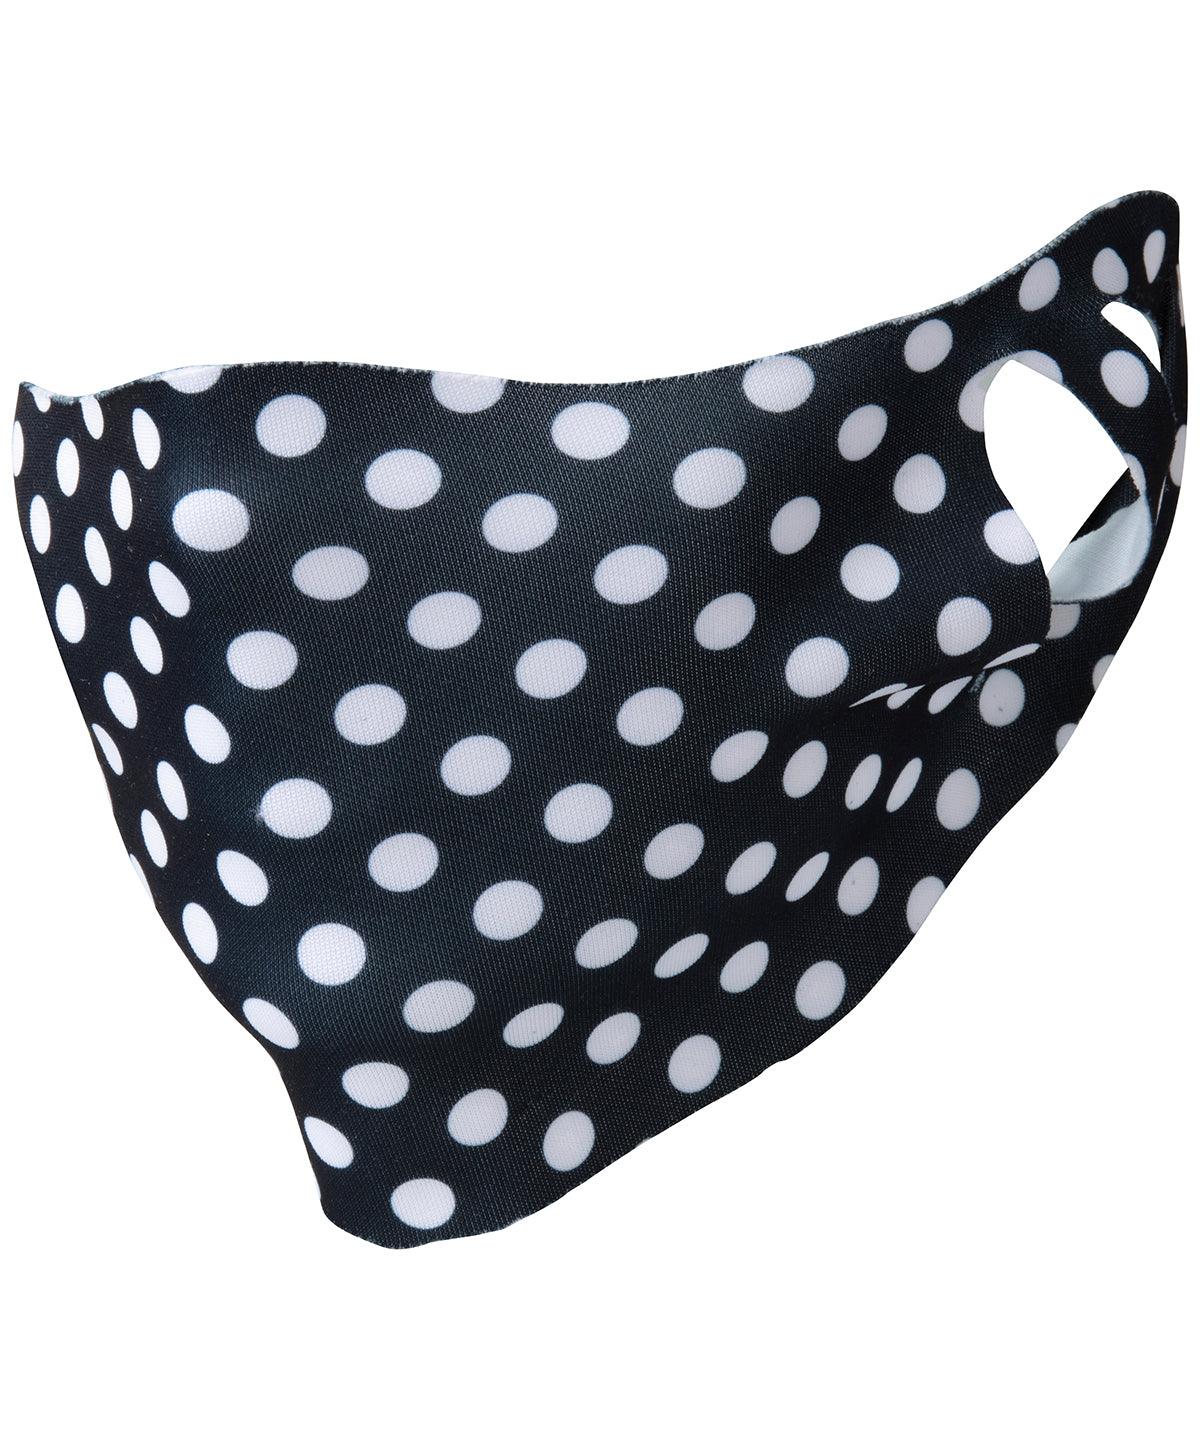 Polka Dot - Face cover (pack of 50) Face Covers AXQ Face Covers, Personal Protection, Selected Protectivewear, Sublimation Schoolwear Centres